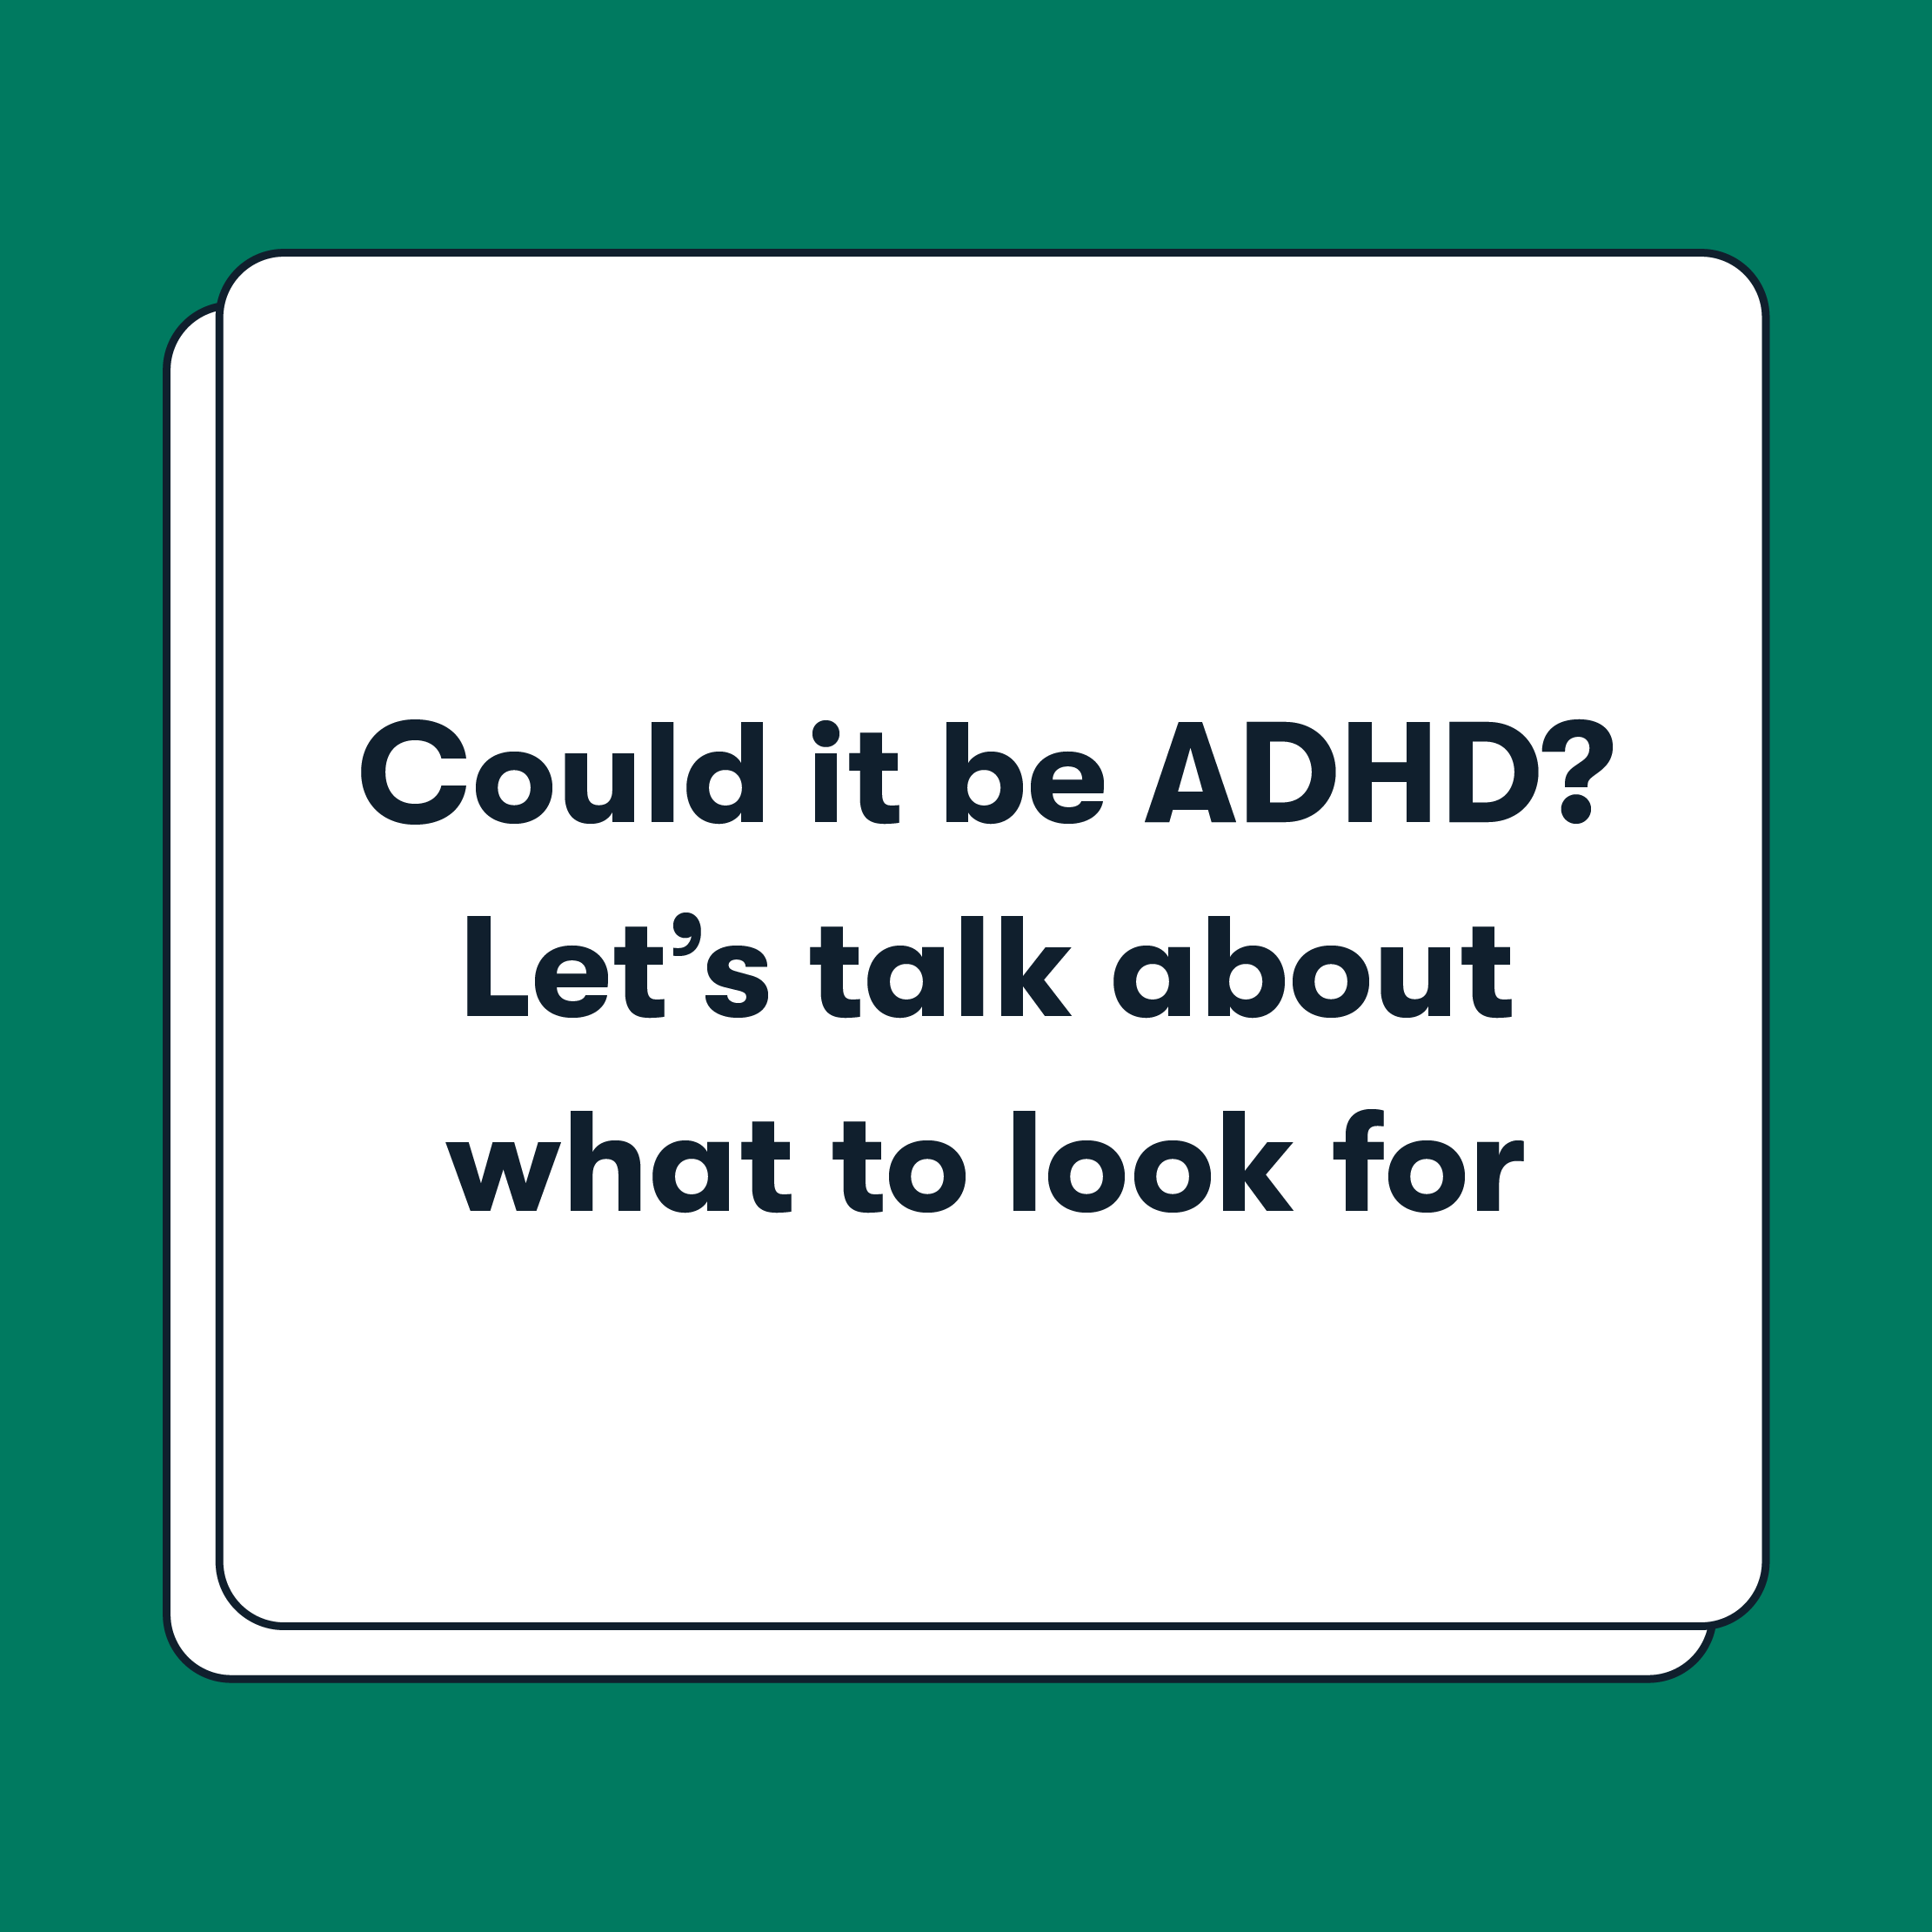 could it be adhd? let's talk about what to look for